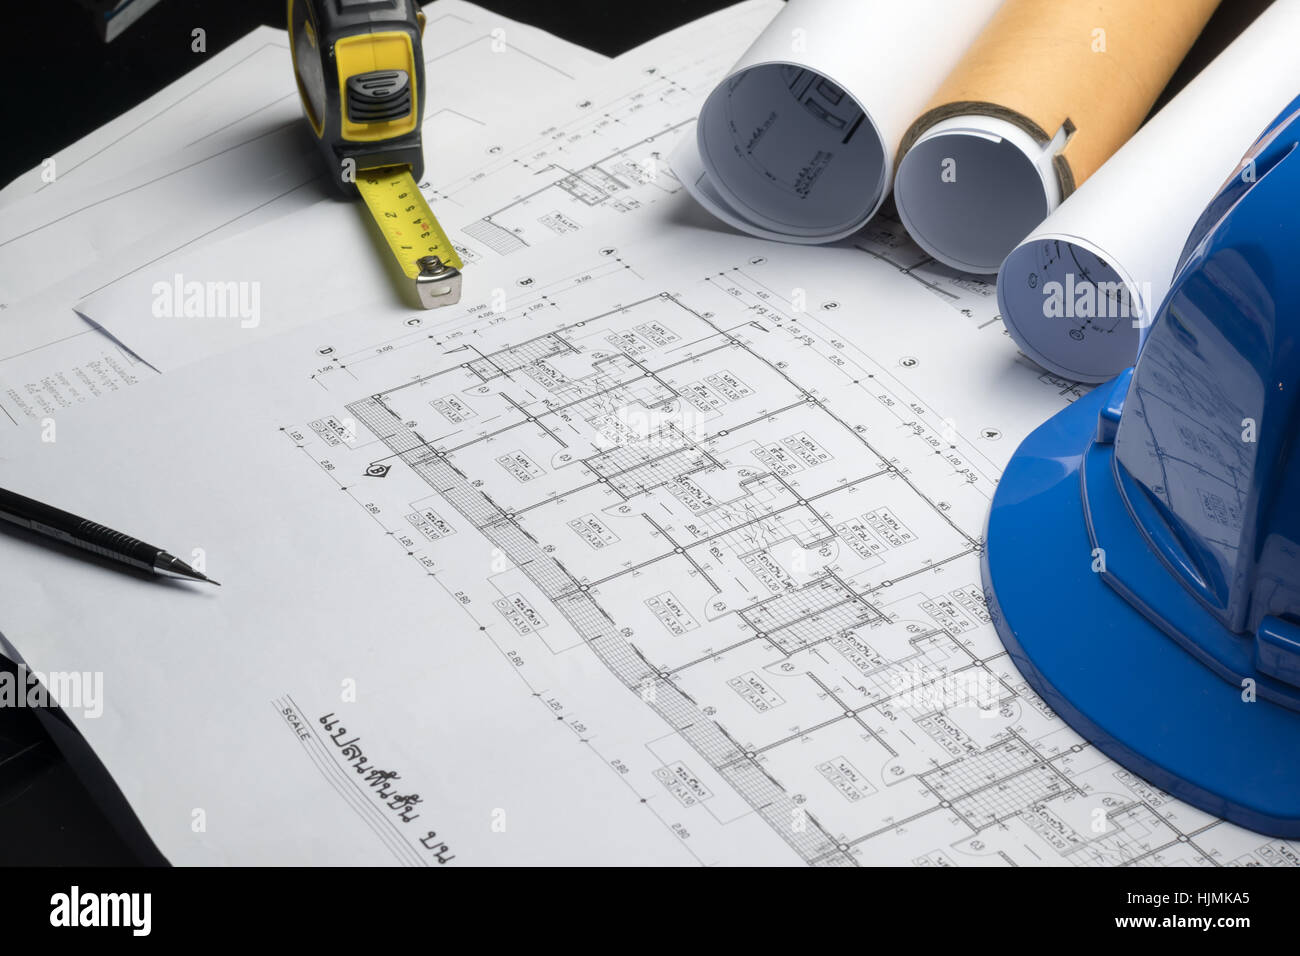 engineering diagram blueprint paper drafting project sketch architectural,selective focus. Stock Photo